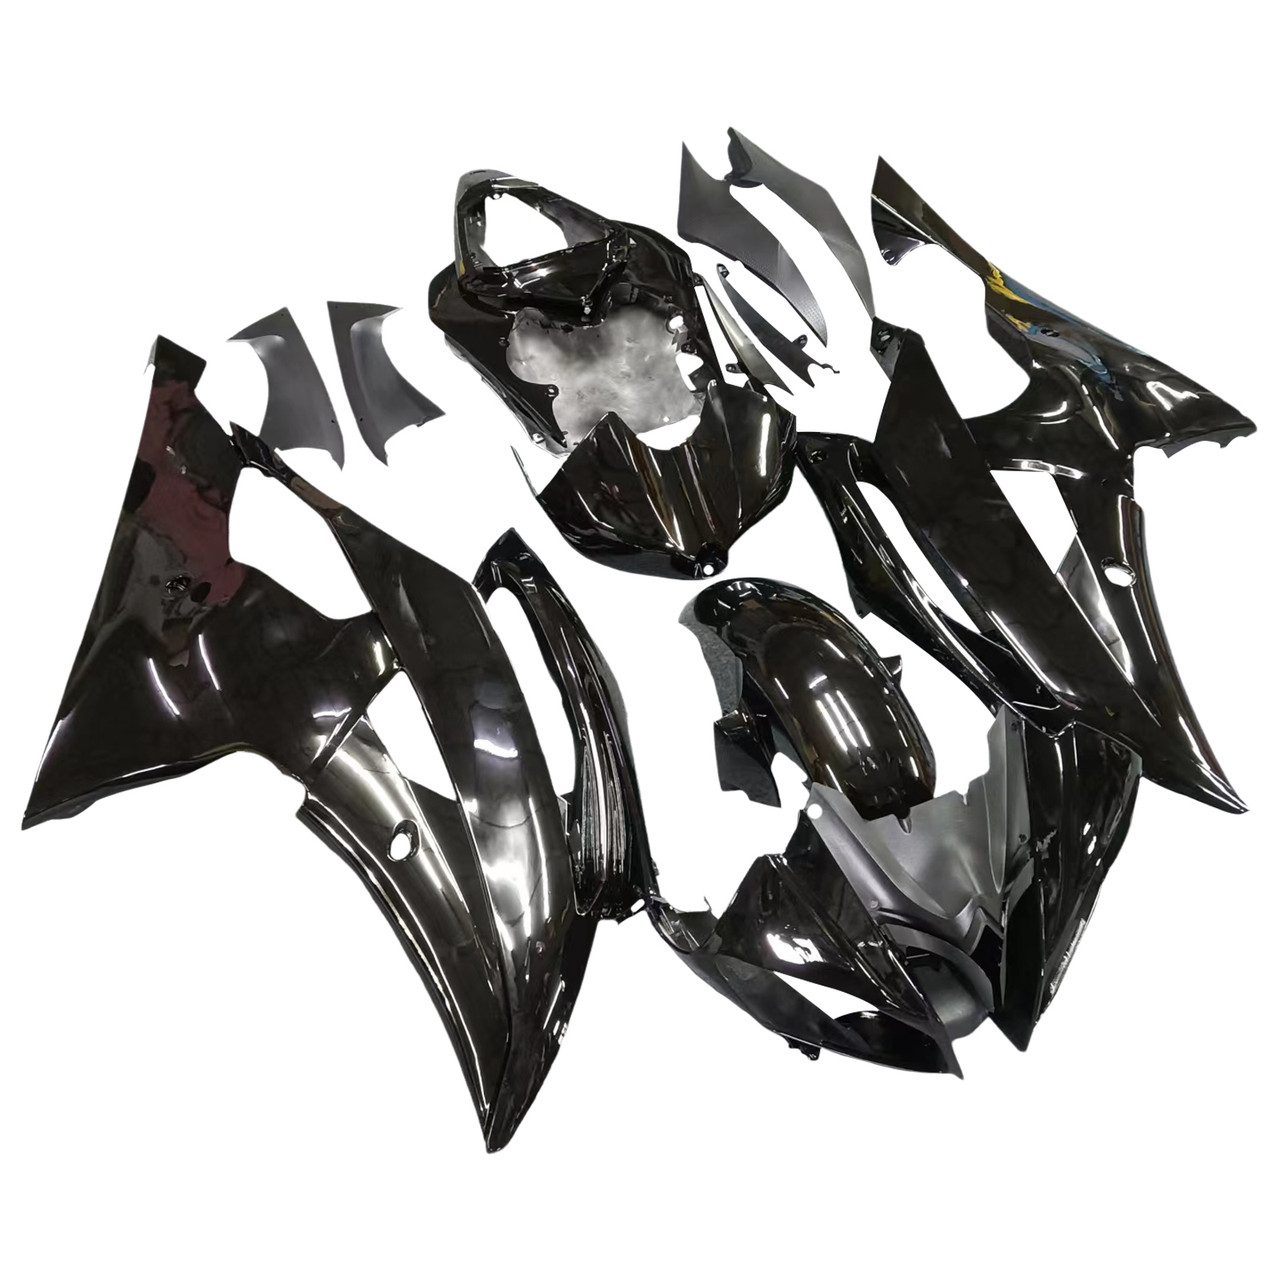 Amotopart Fairing Injection Plastic Body Kit Fit For YAMAHA YZF-R6 2008-2016 Gloss Black